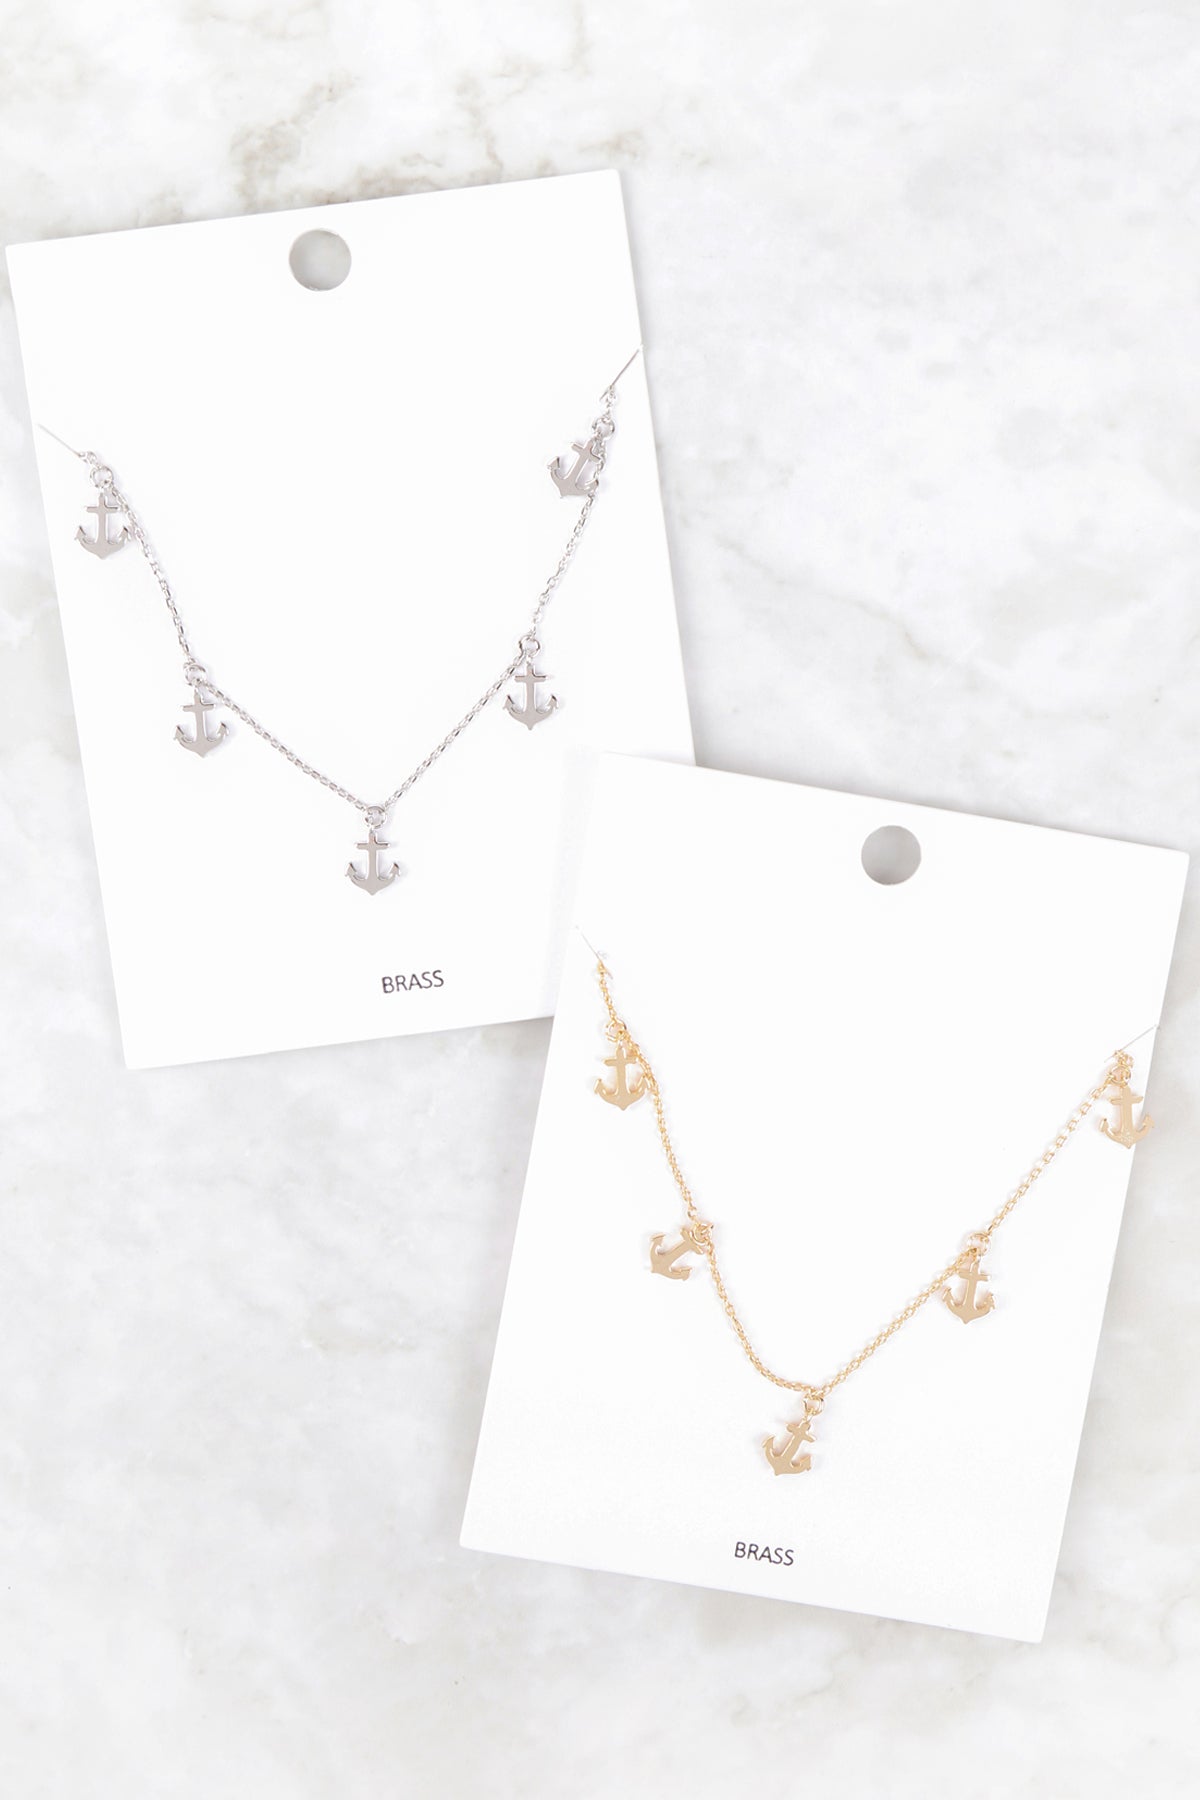 ANCHOR DAINTY STATIONERY CHARM NECKLACE